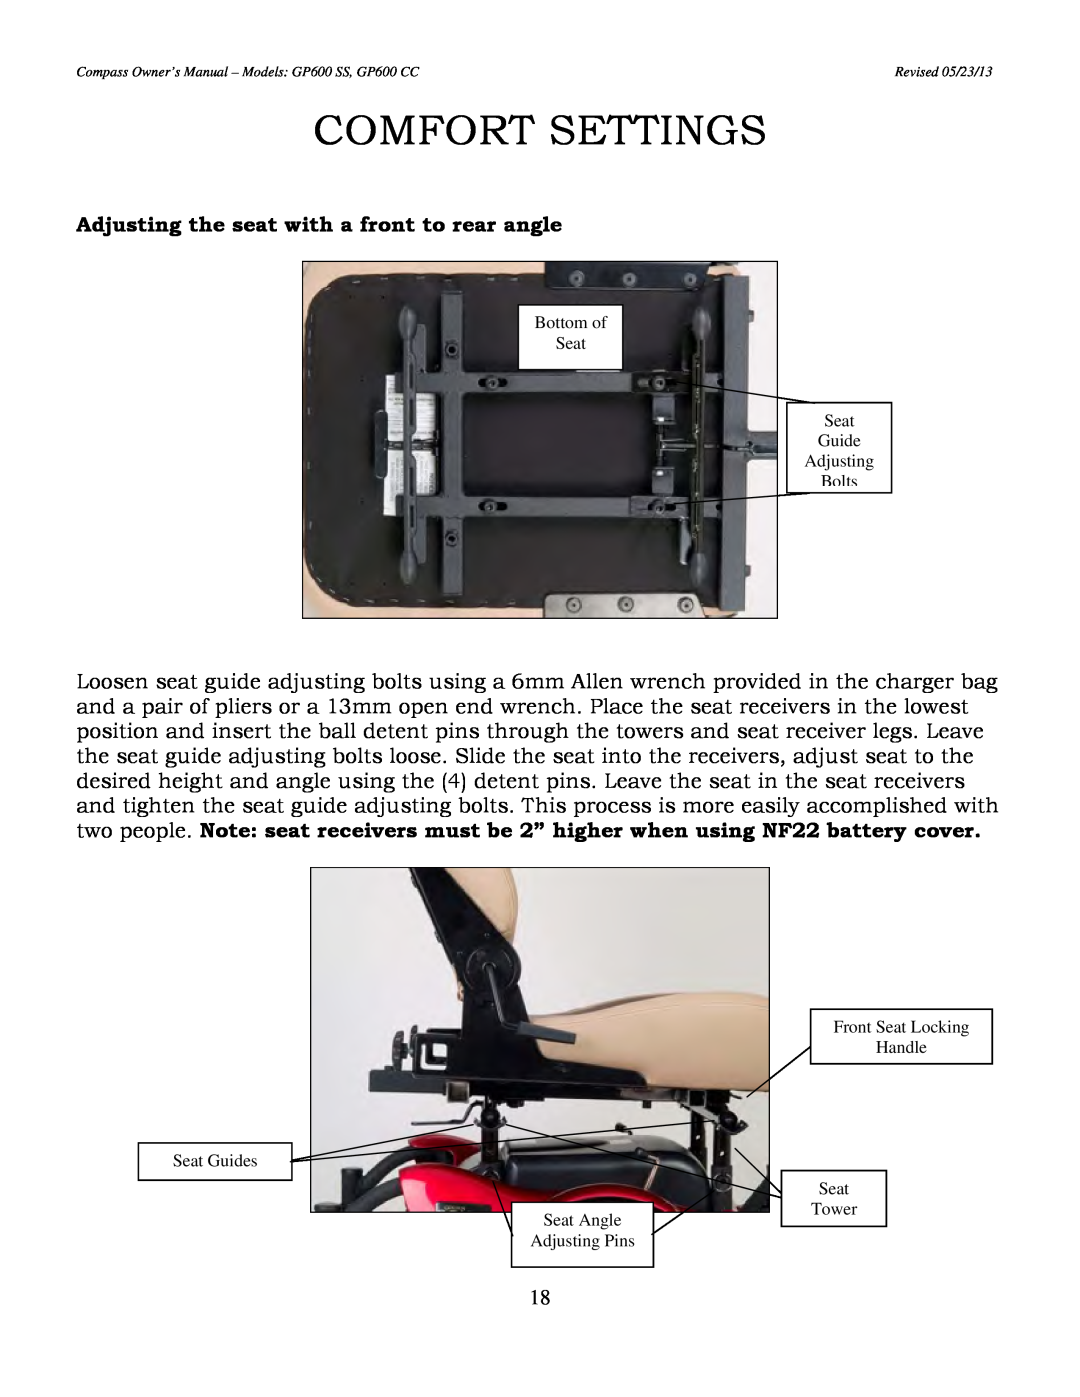 Golden Technologies GP600 SS Comfort Settings, Adjusting the seat with a front to rear angle, Bottom of Seat, Seat Guides 